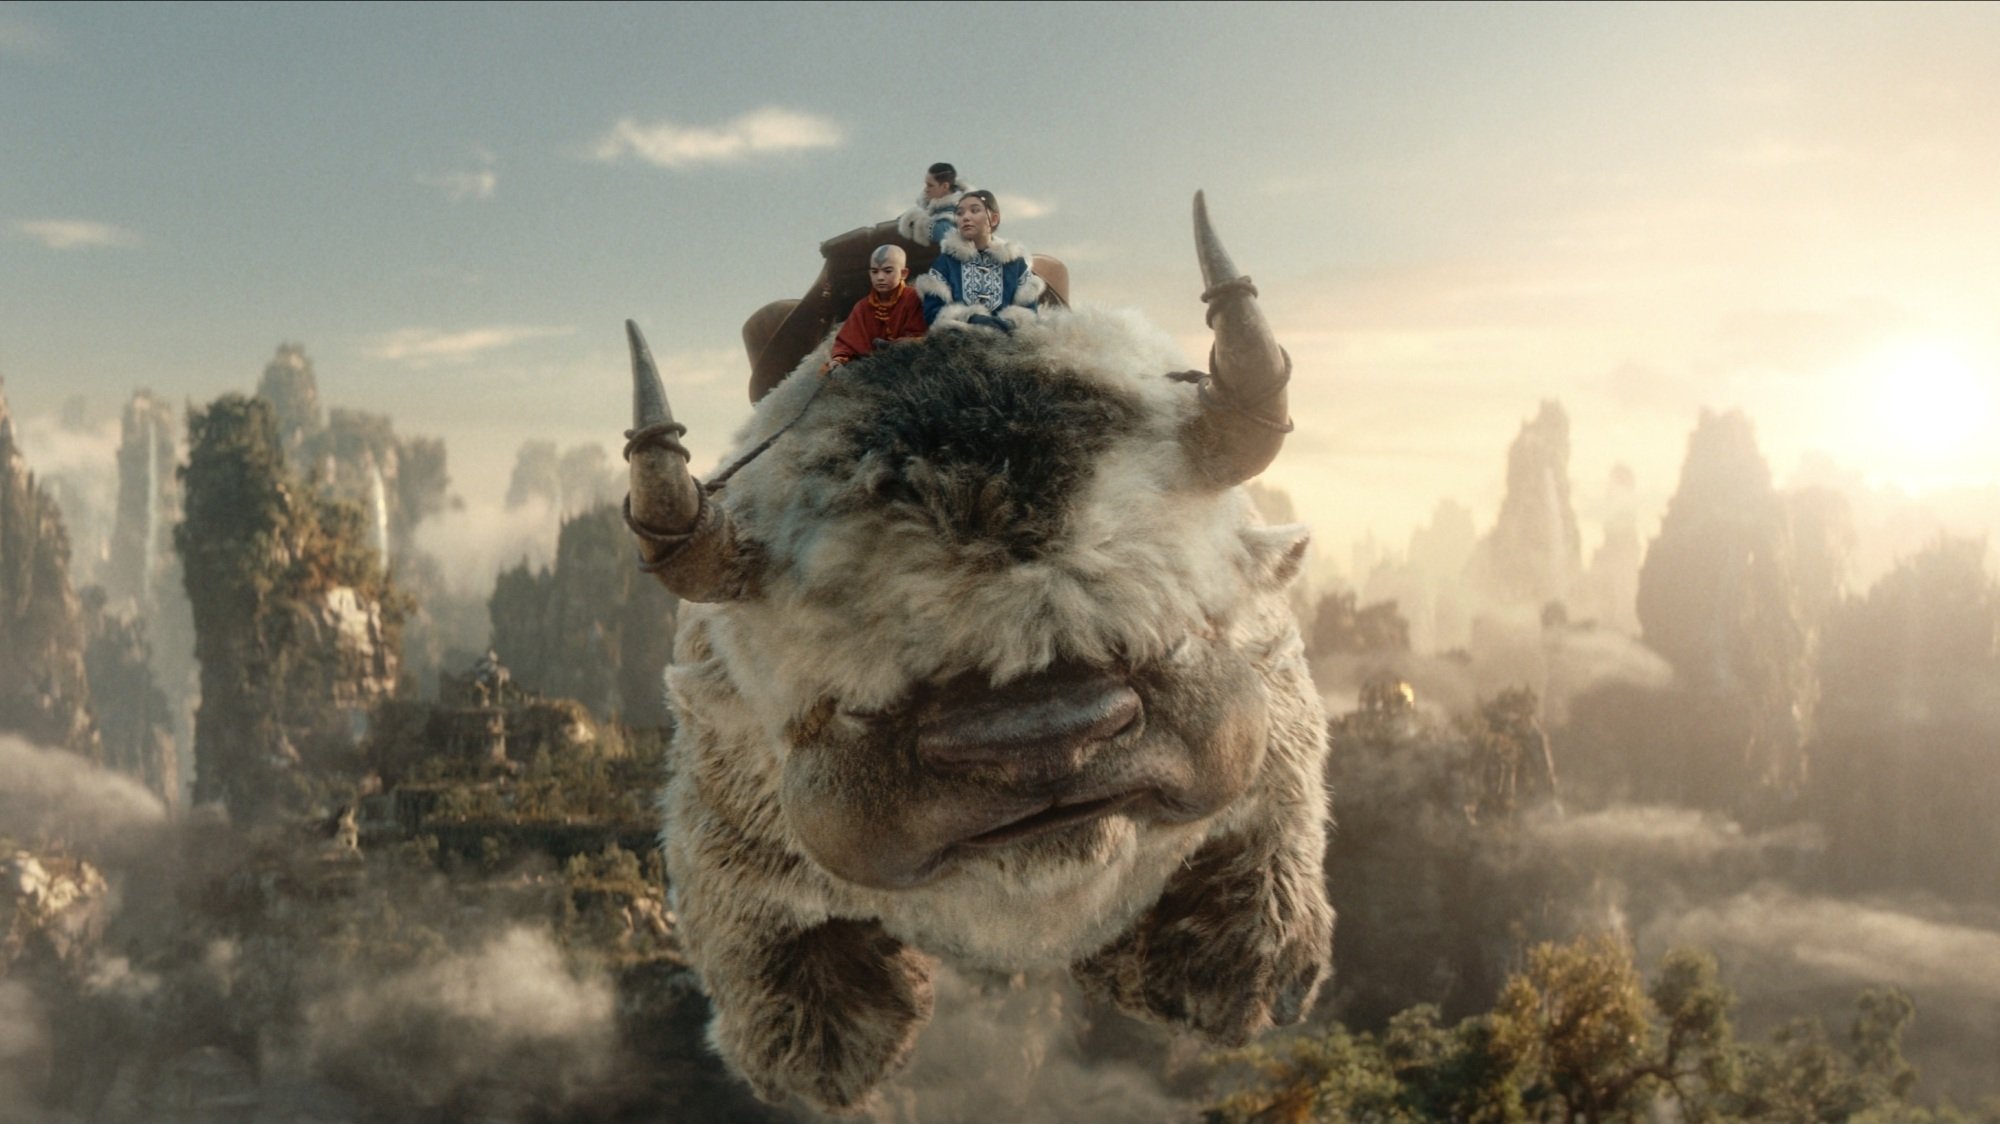 Appa the sky bison flying through the sky with Aang, Katara, and Sokka on his back.